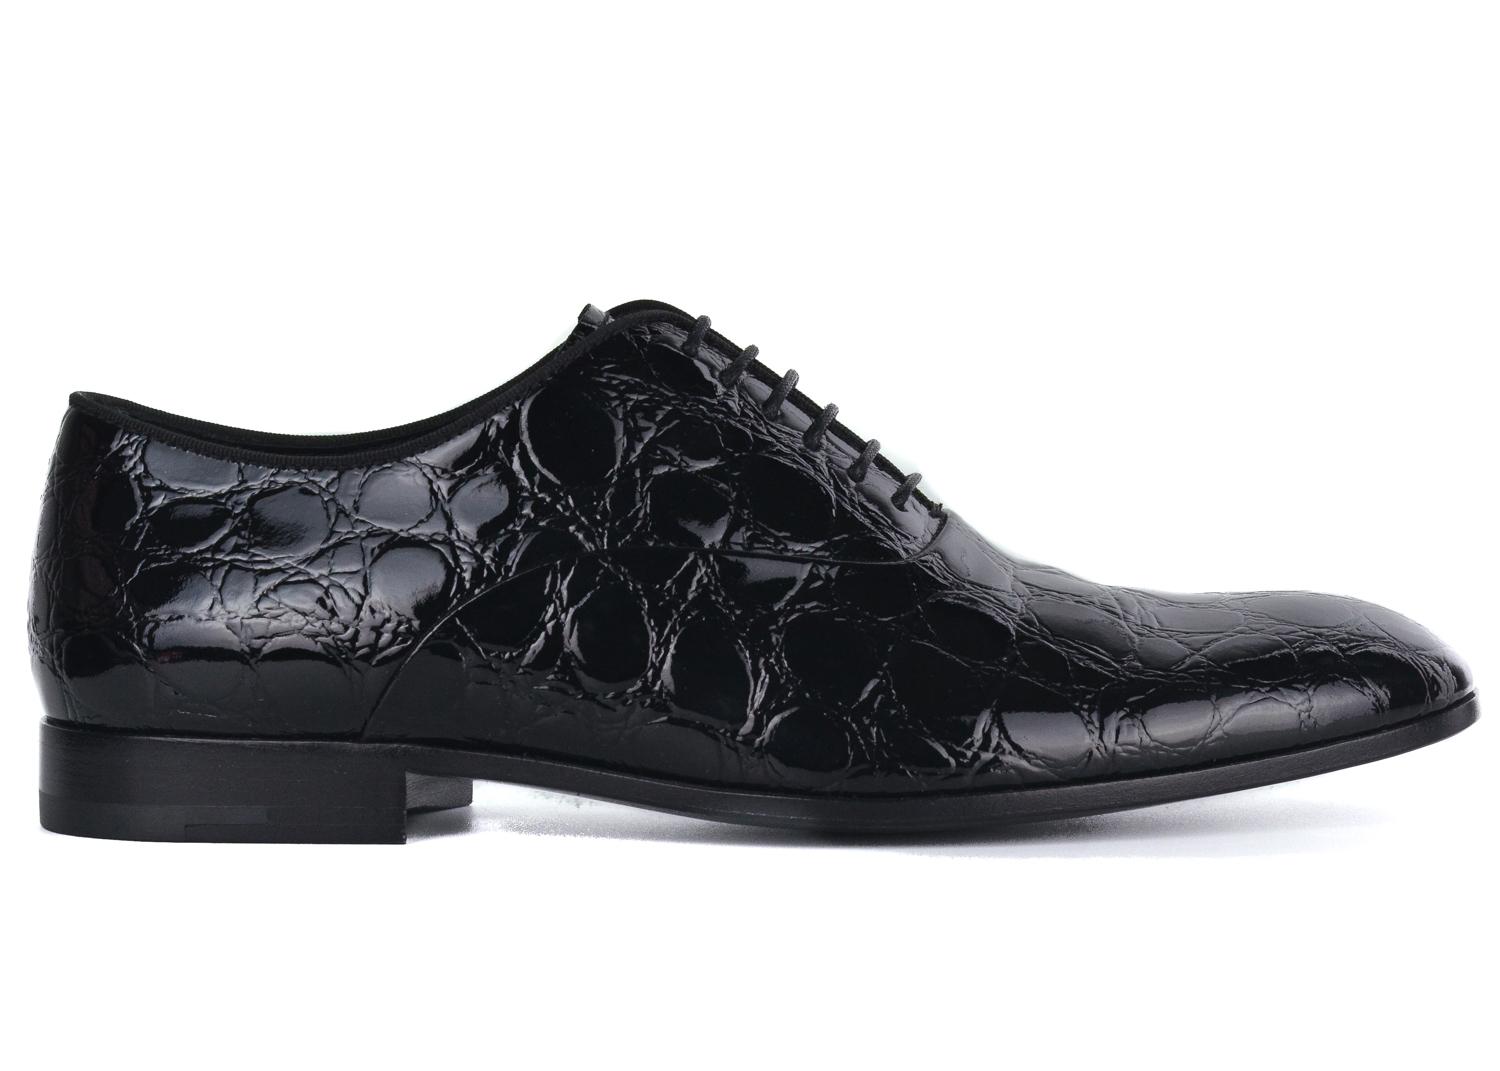 Giorgio Armani Mens Black Croc Embossed Patent Leather Derbys In New Condition For Sale In Brooklyn, NY